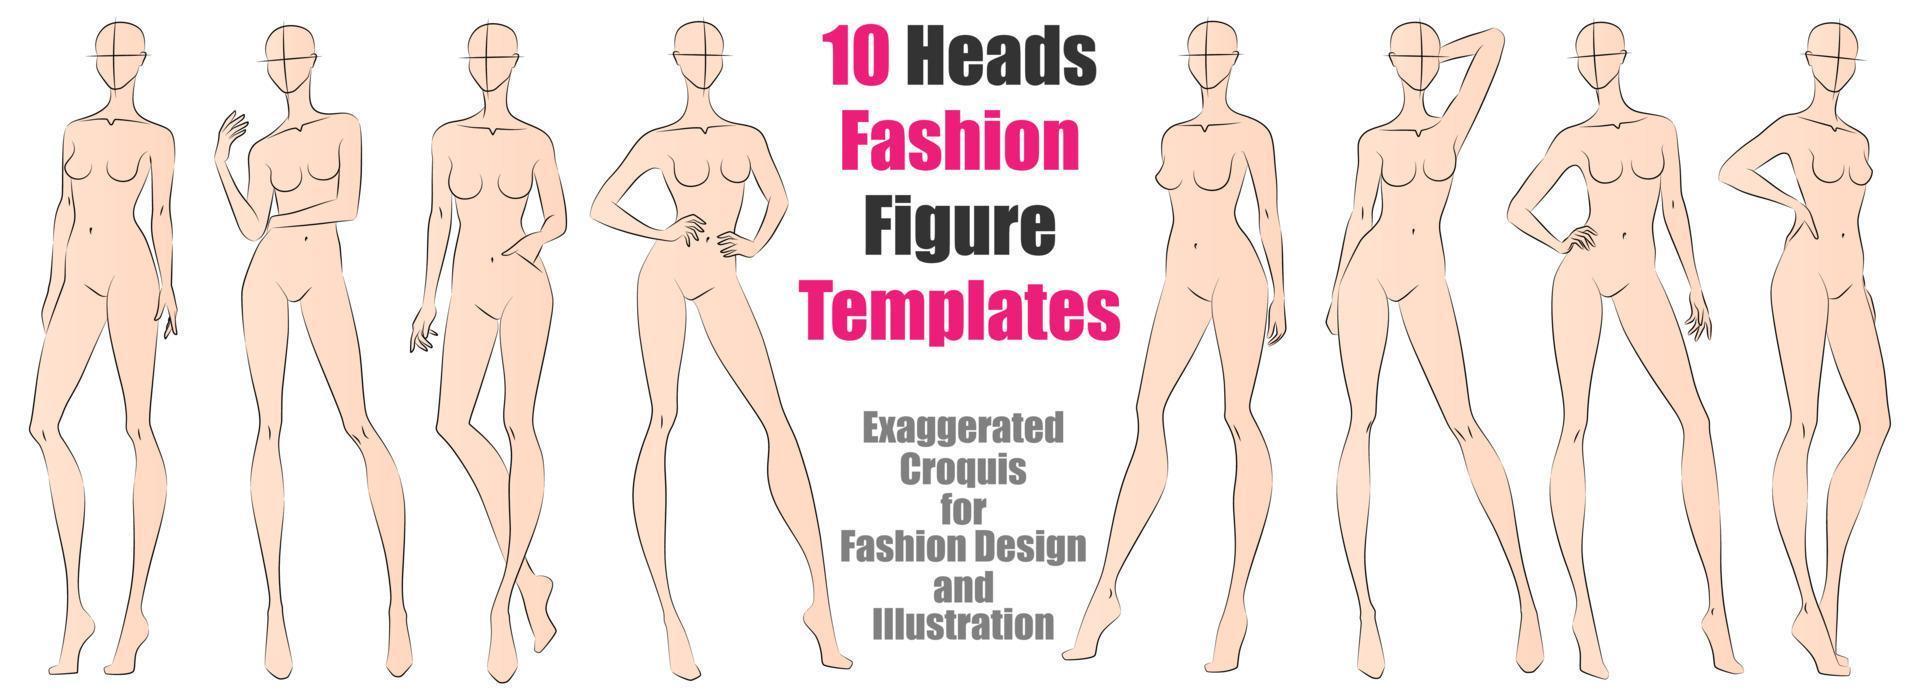 10 Heads Fashion Figure Templates. Exaggerated Croquis for Fashion Design and Illustration. Vector Illustration